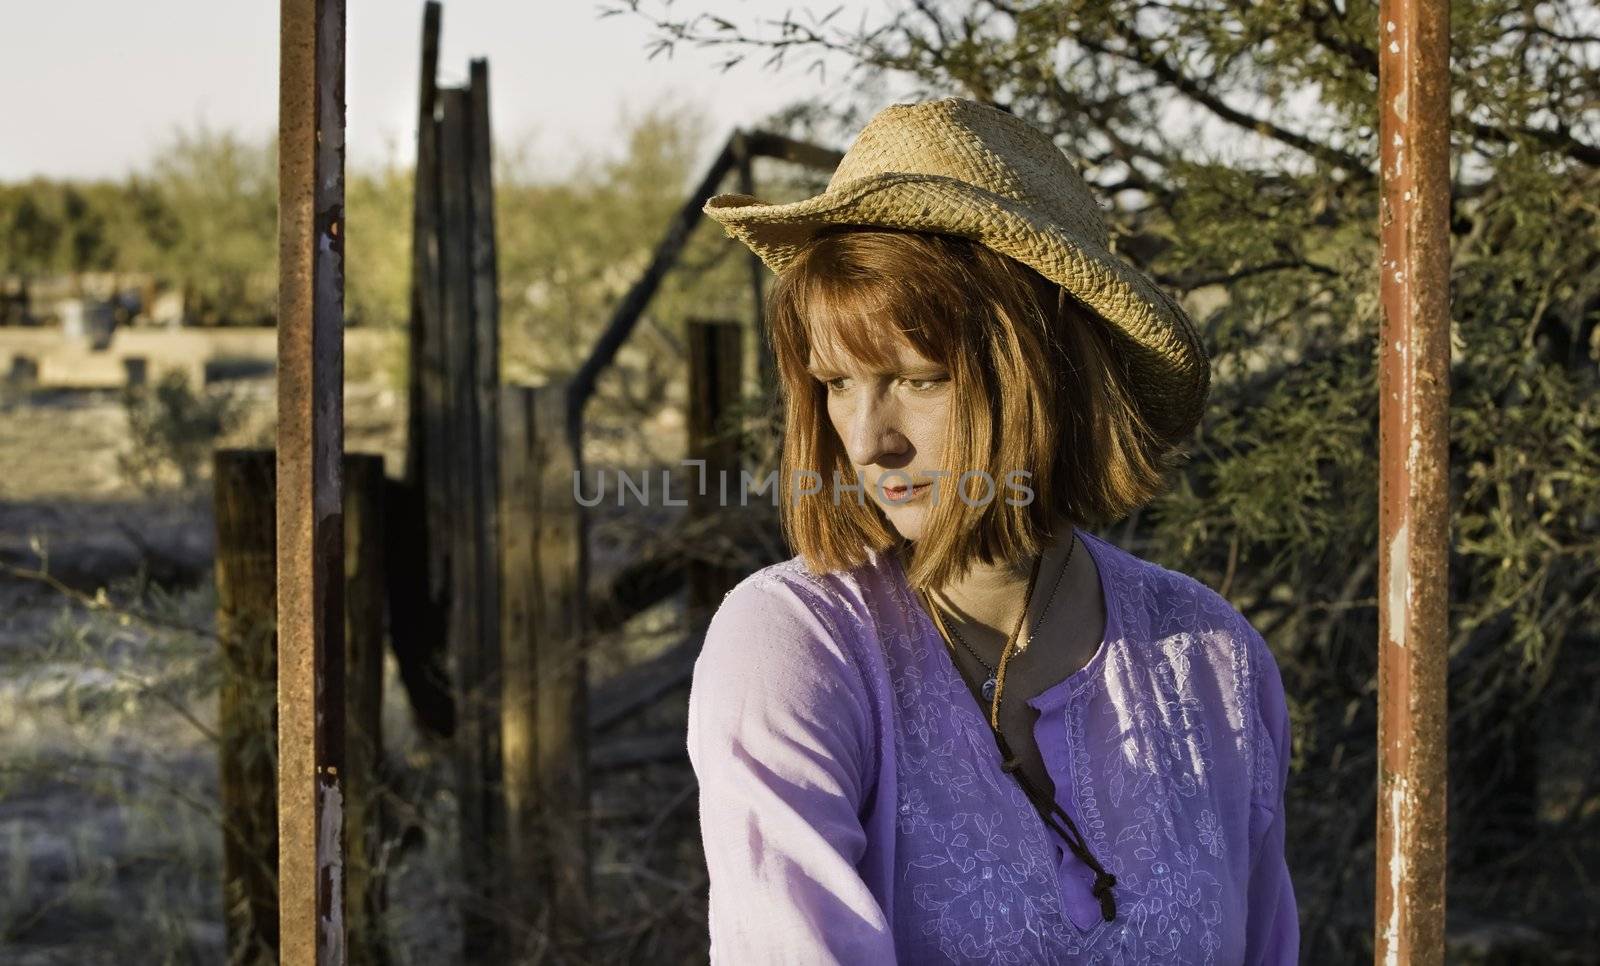 Woman wearing a cowboy hat in a rural setting.